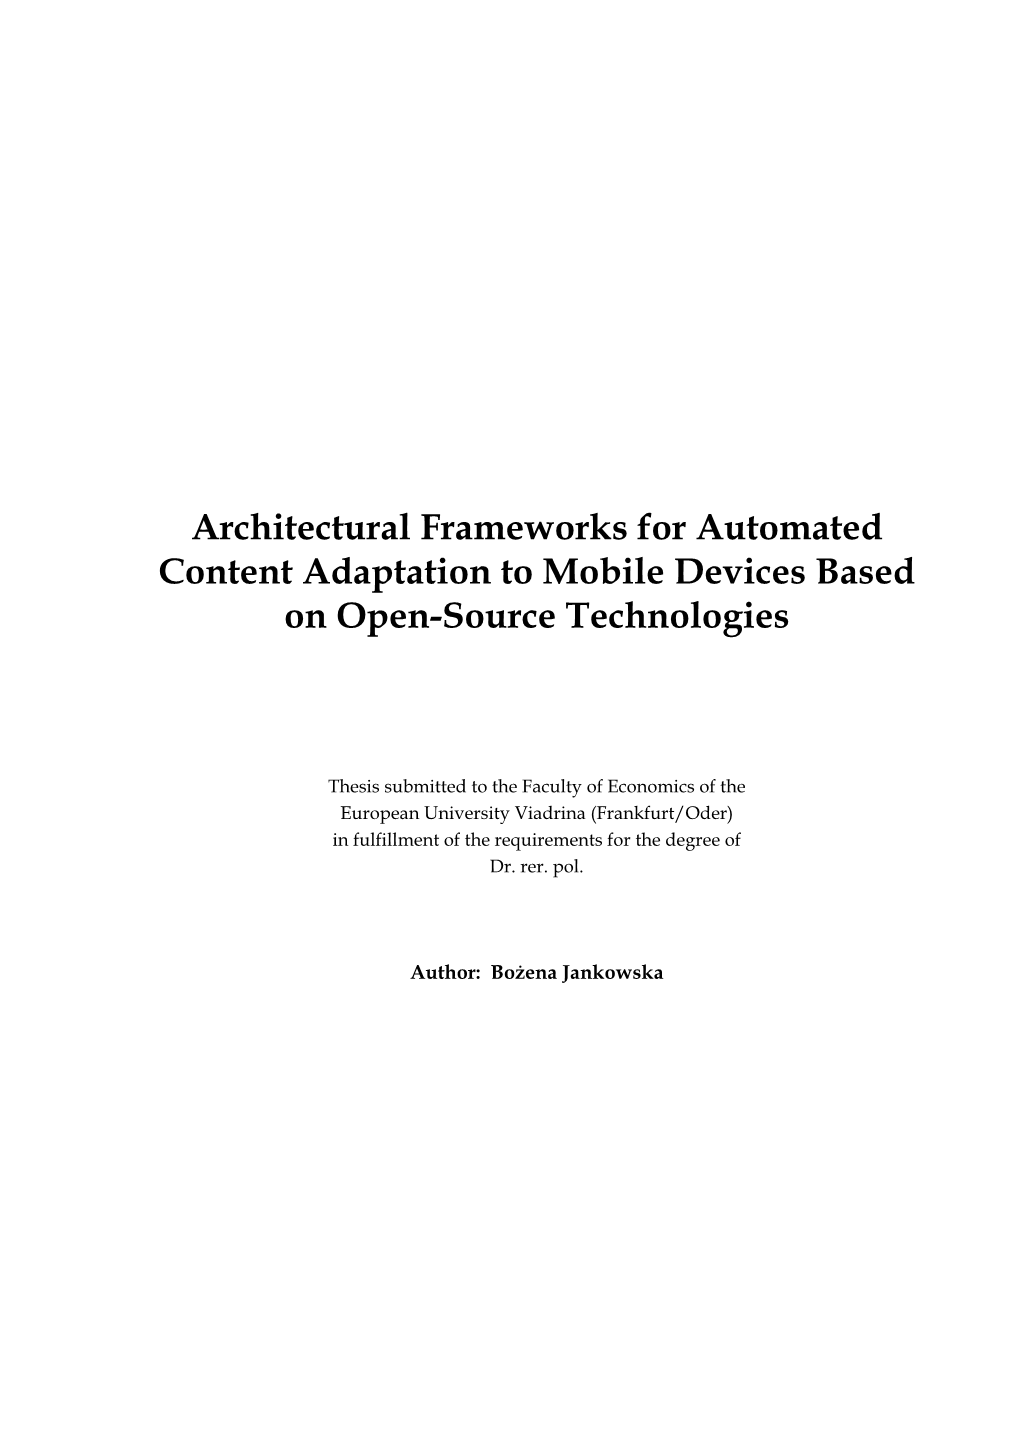 Architectural Frameworks for Automated Content Adaptation to Mobile Devices Based on Open-Source Technologies